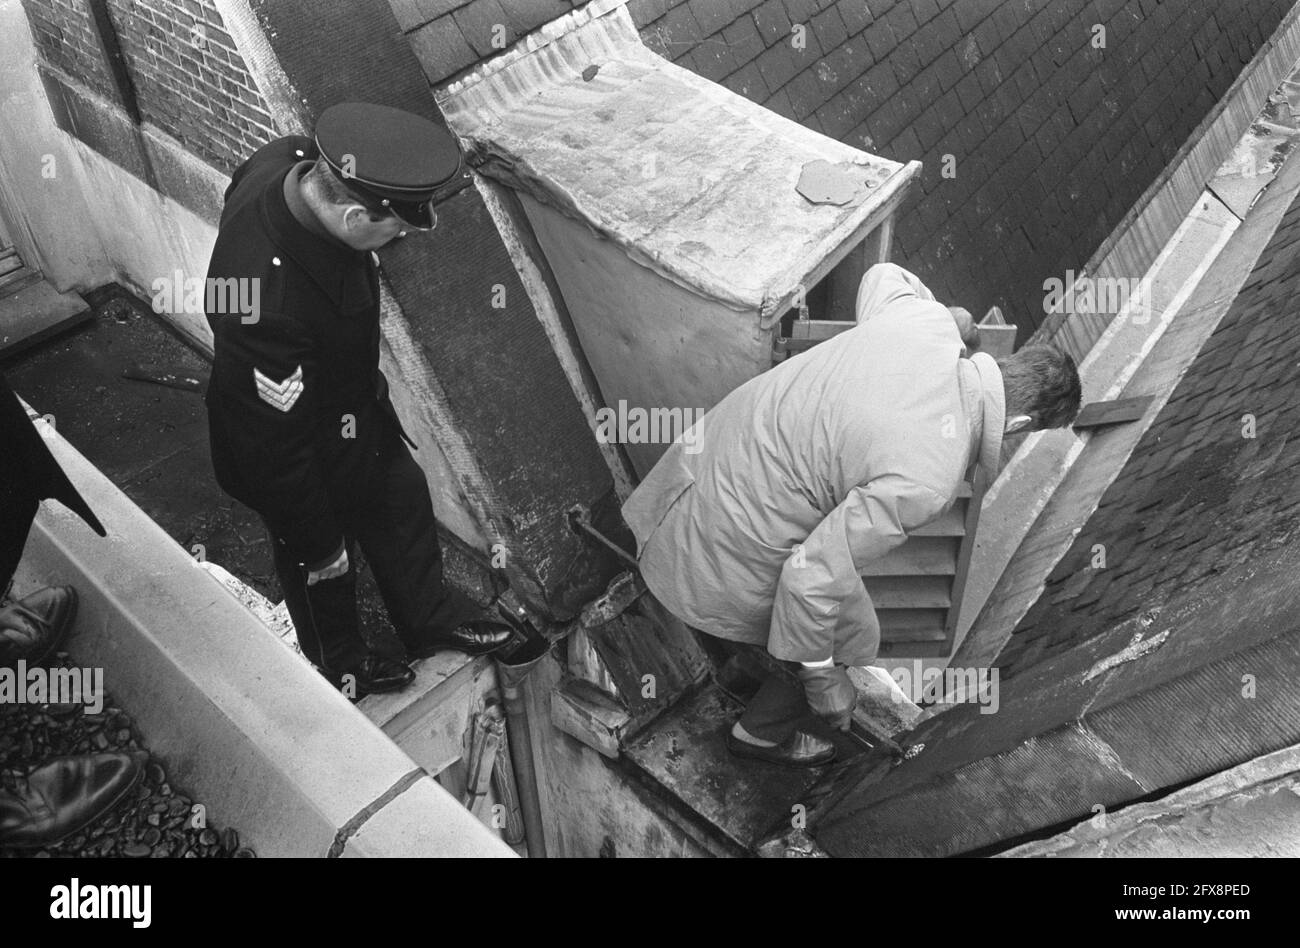 Occupation Maagdenhuis Amsterdam, by students police on roof Maagdenhuis, looking out the windows occupiers, 20 May 1969, POLICE, occupations, students, The Netherlands, 20th century press agency photo, news to remember, documentary, historic photography 1945-1990, visual stories, human history of the Twentieth Century, capturing moments in time Stock Photo